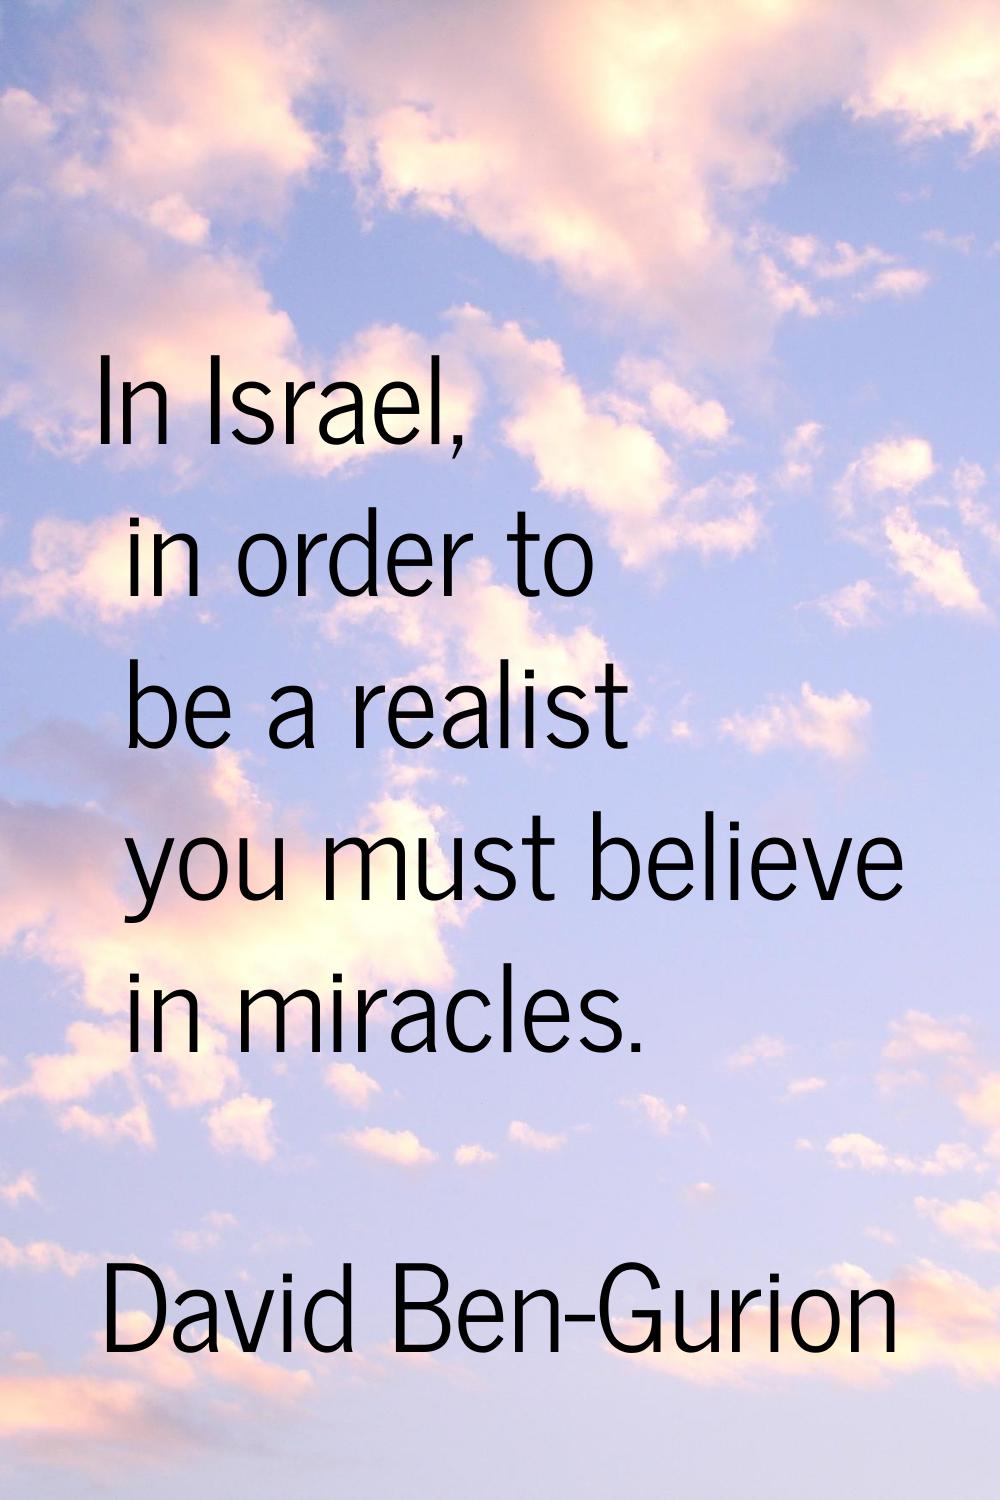 In Israel, in order to be a realist you must believe in miracles.